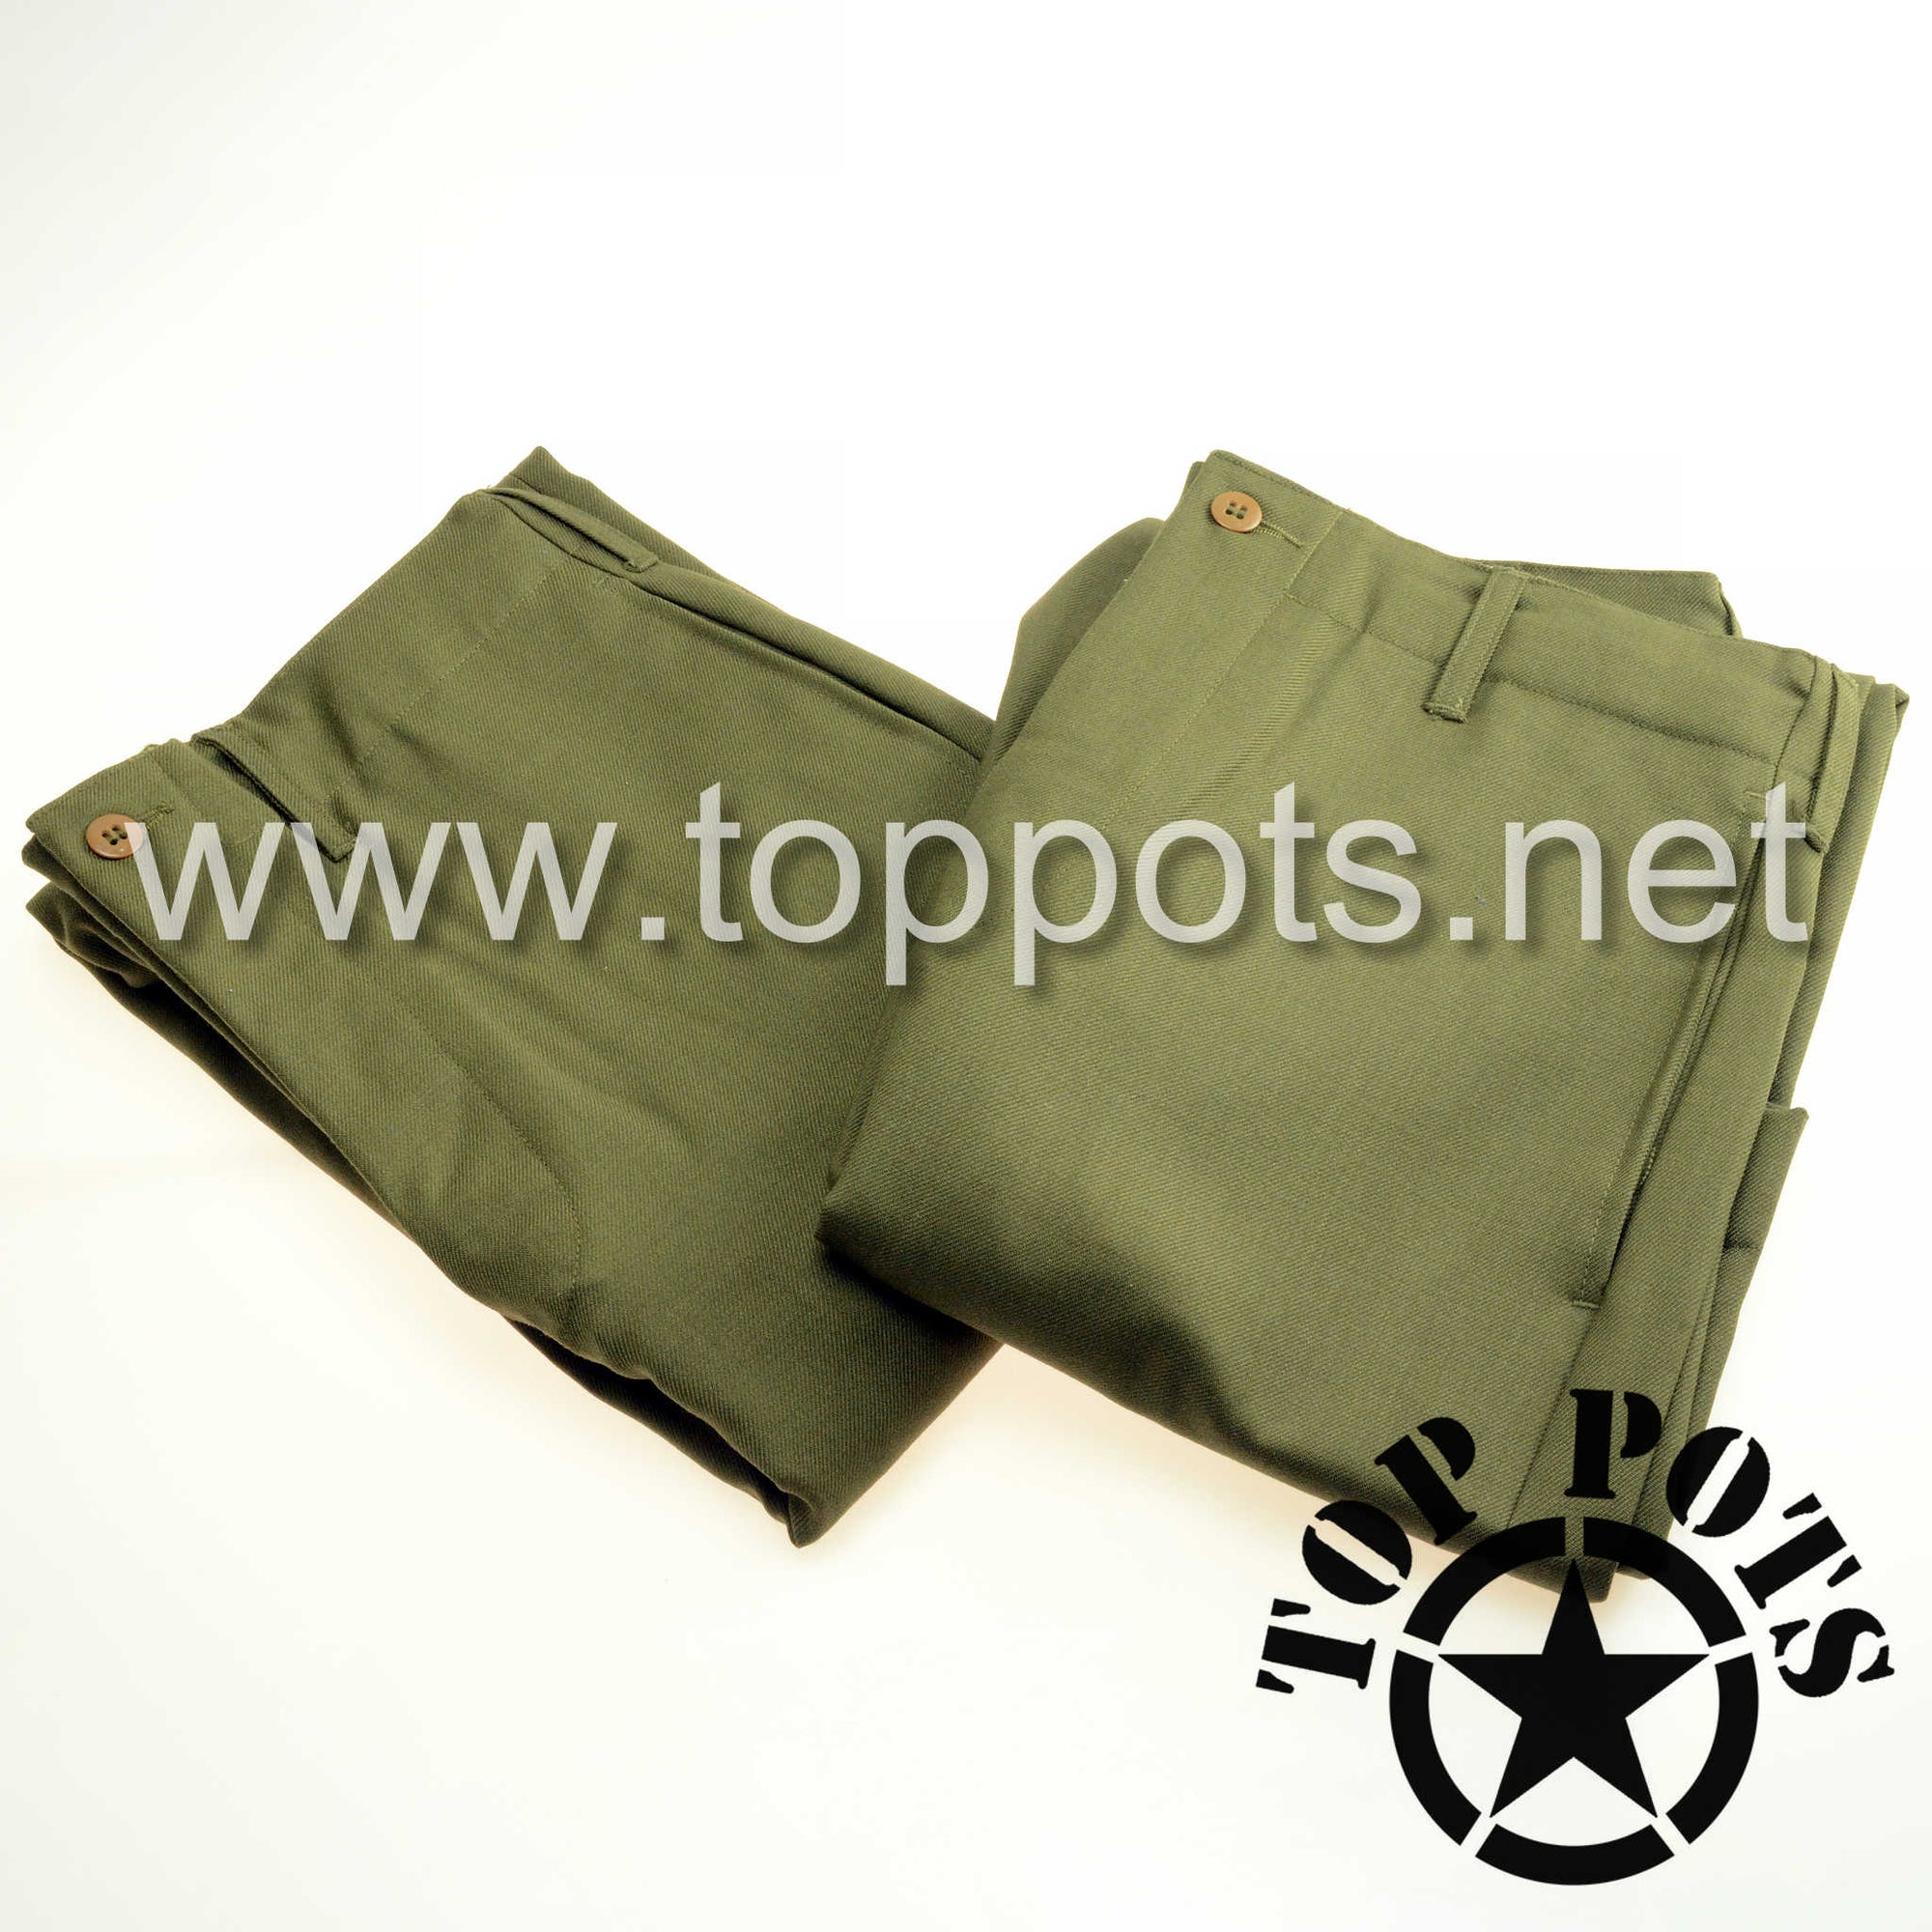 WWII US Army Reproduction M1937 Mustard Wool Enlisted Uniform Service Pants – Trousers, Wool Serge, OD, Light Shade, M1937